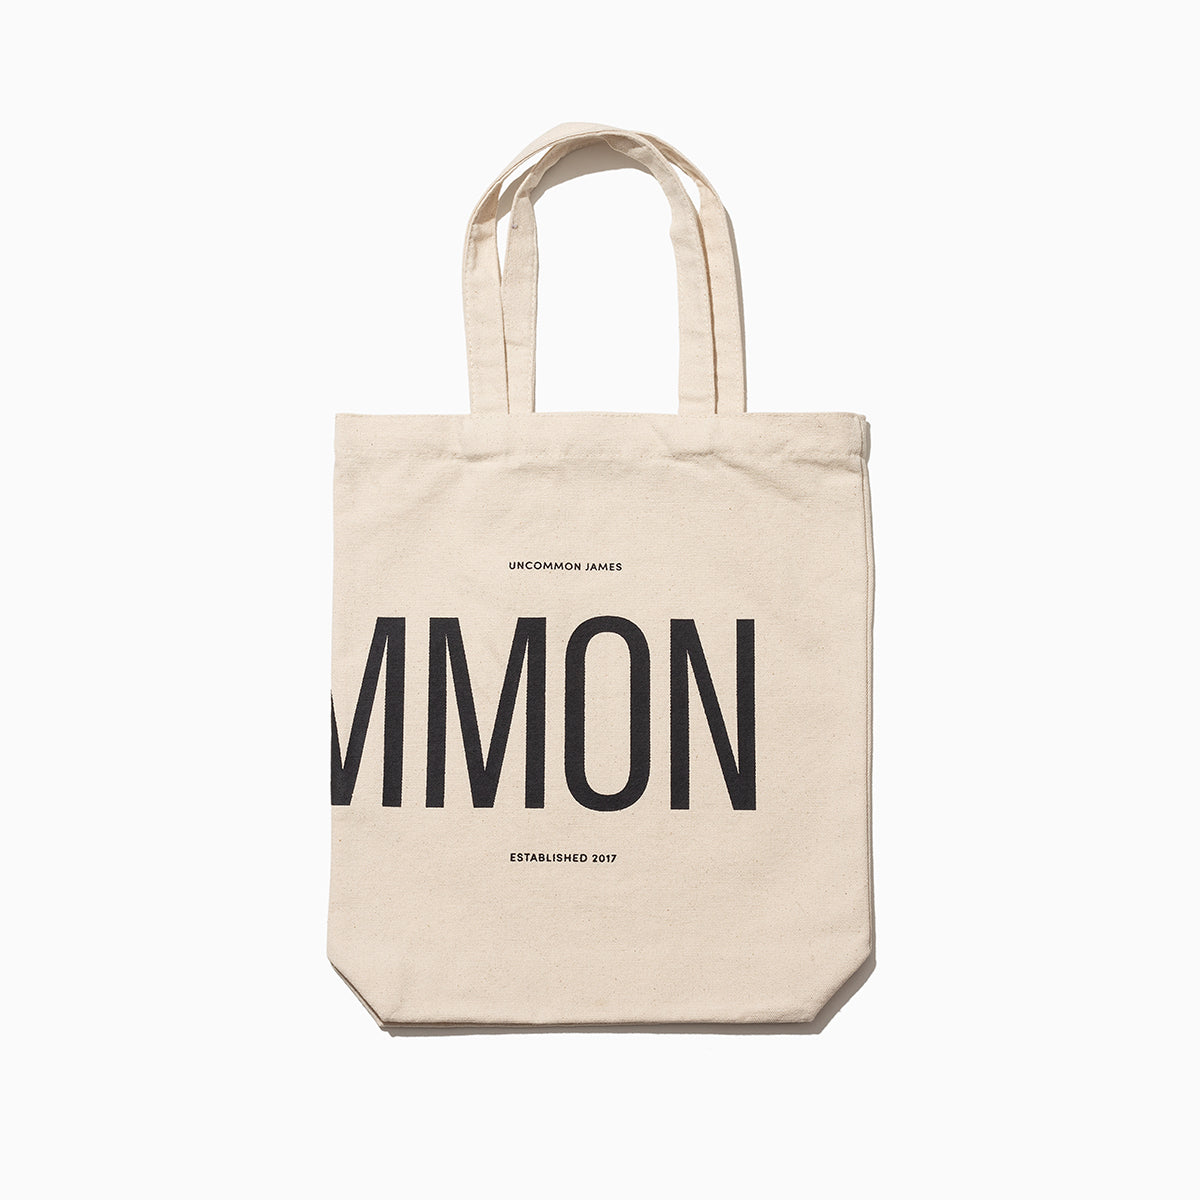 Uncommon Canvas Tote Bag | Product Detail Image | Uncommon James Home